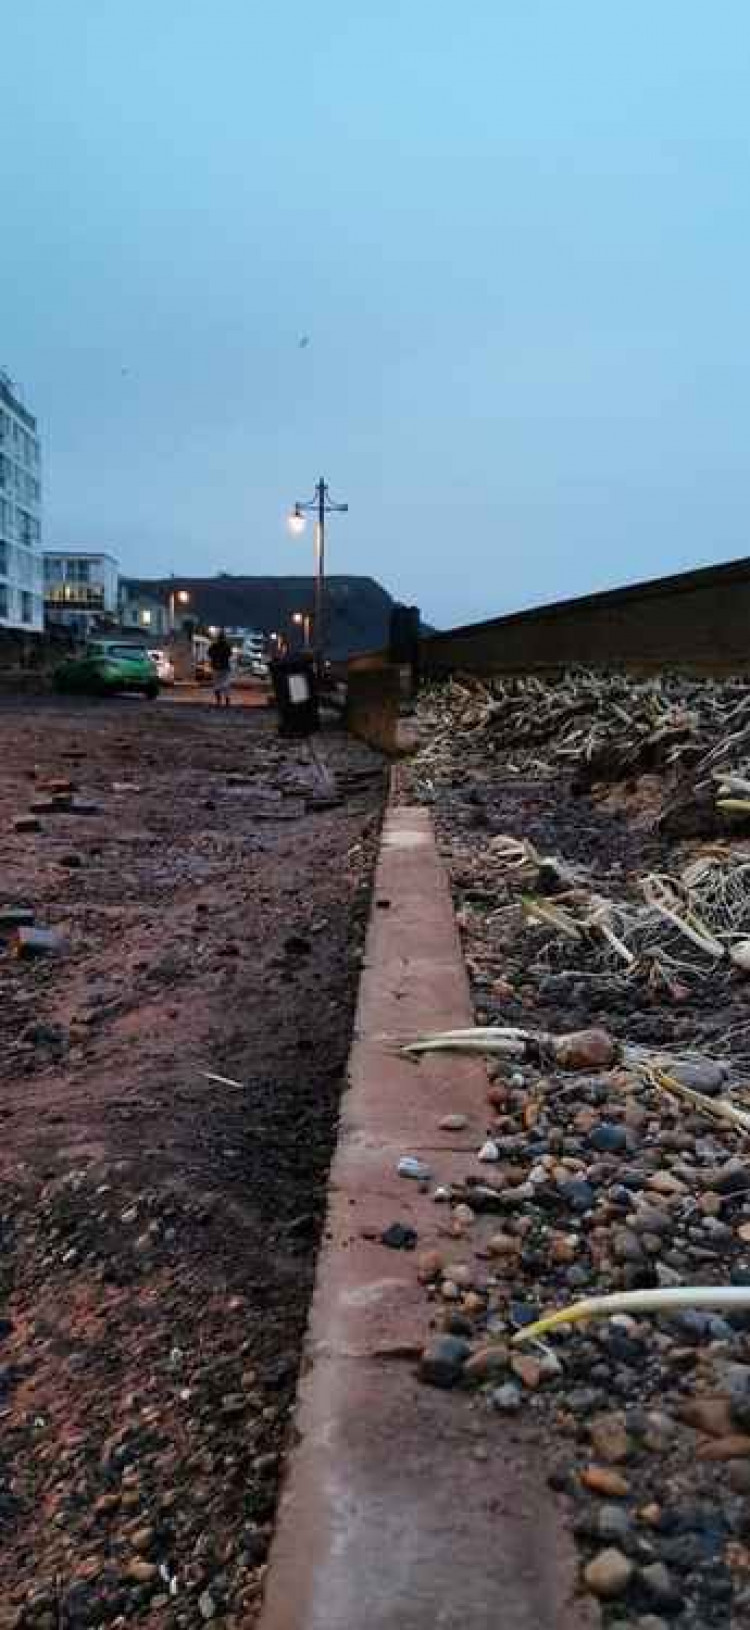 The flooding has caused some damage on Seaton Esplanade (photos by Chris Rogers)